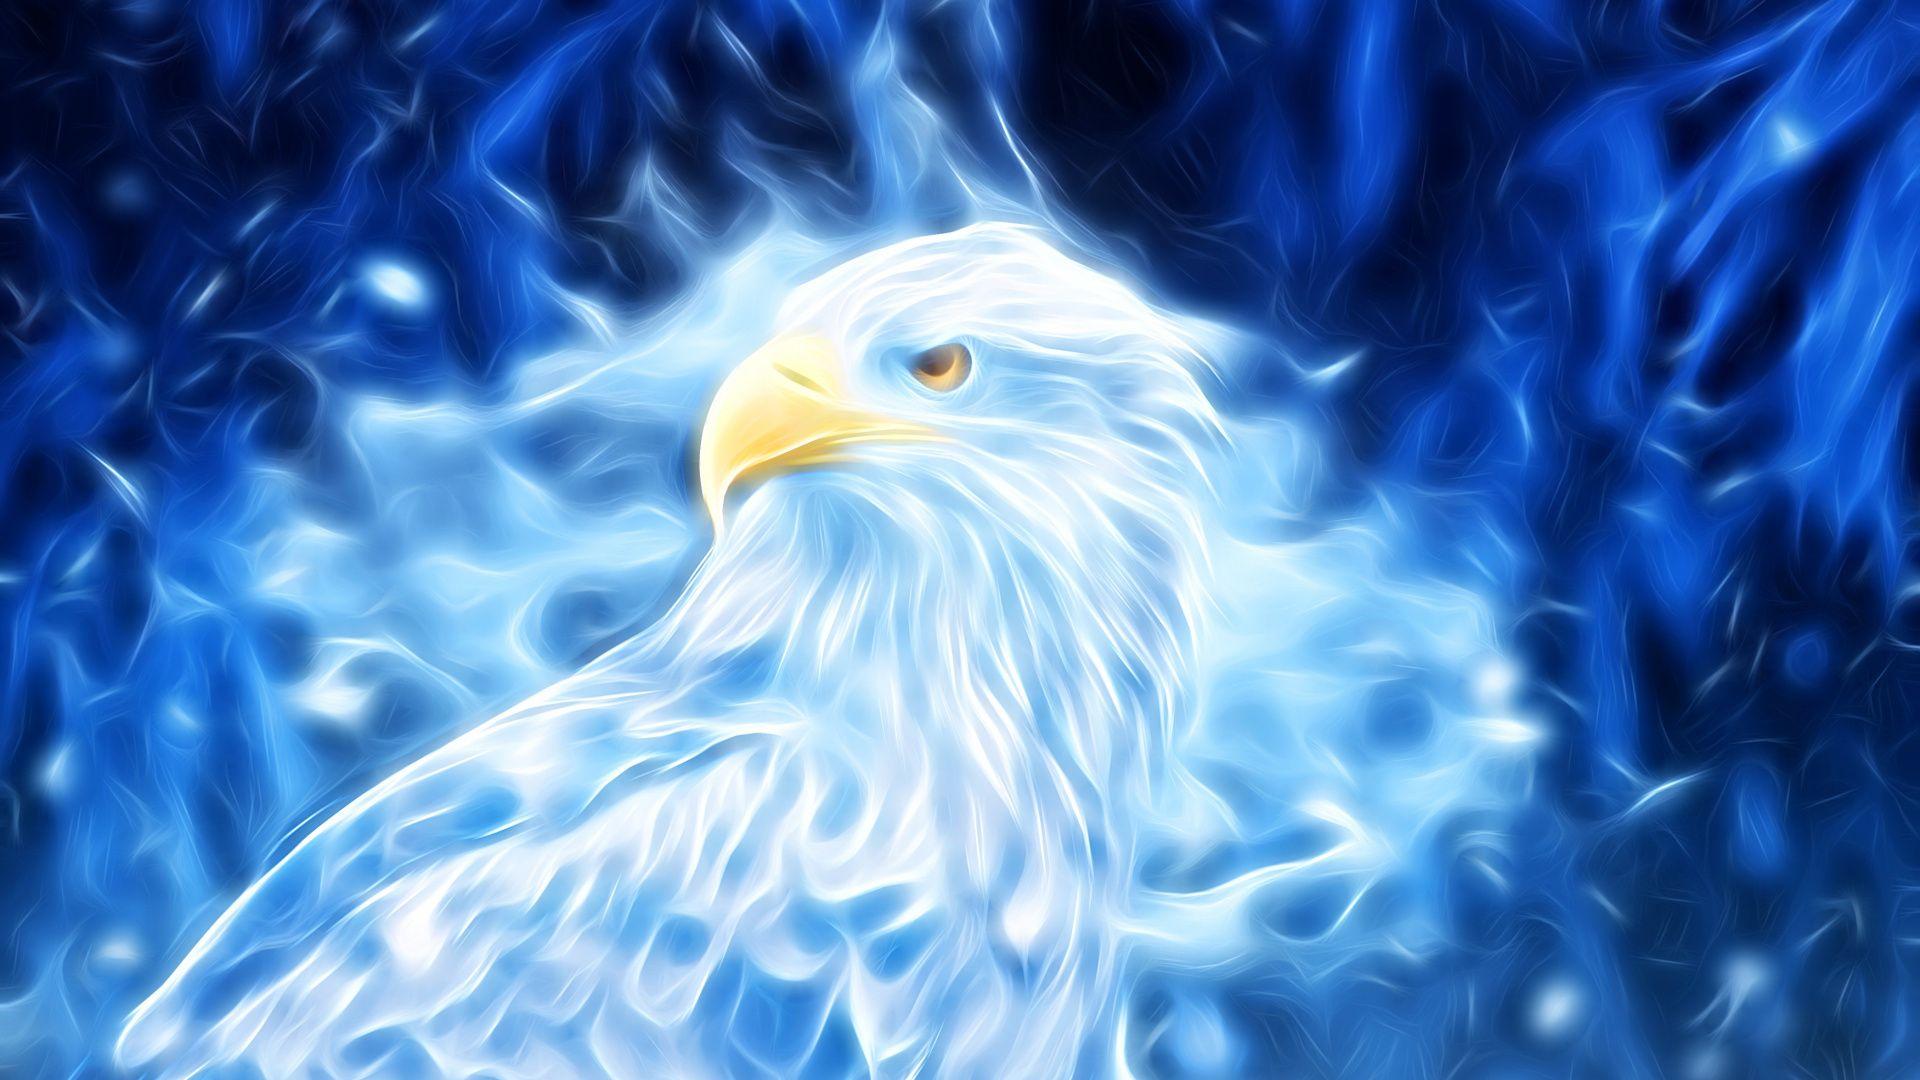 Eagles 1920 X 1080 Wallpapers - Top Free Eagles 1920 X 1080 Backgrounds